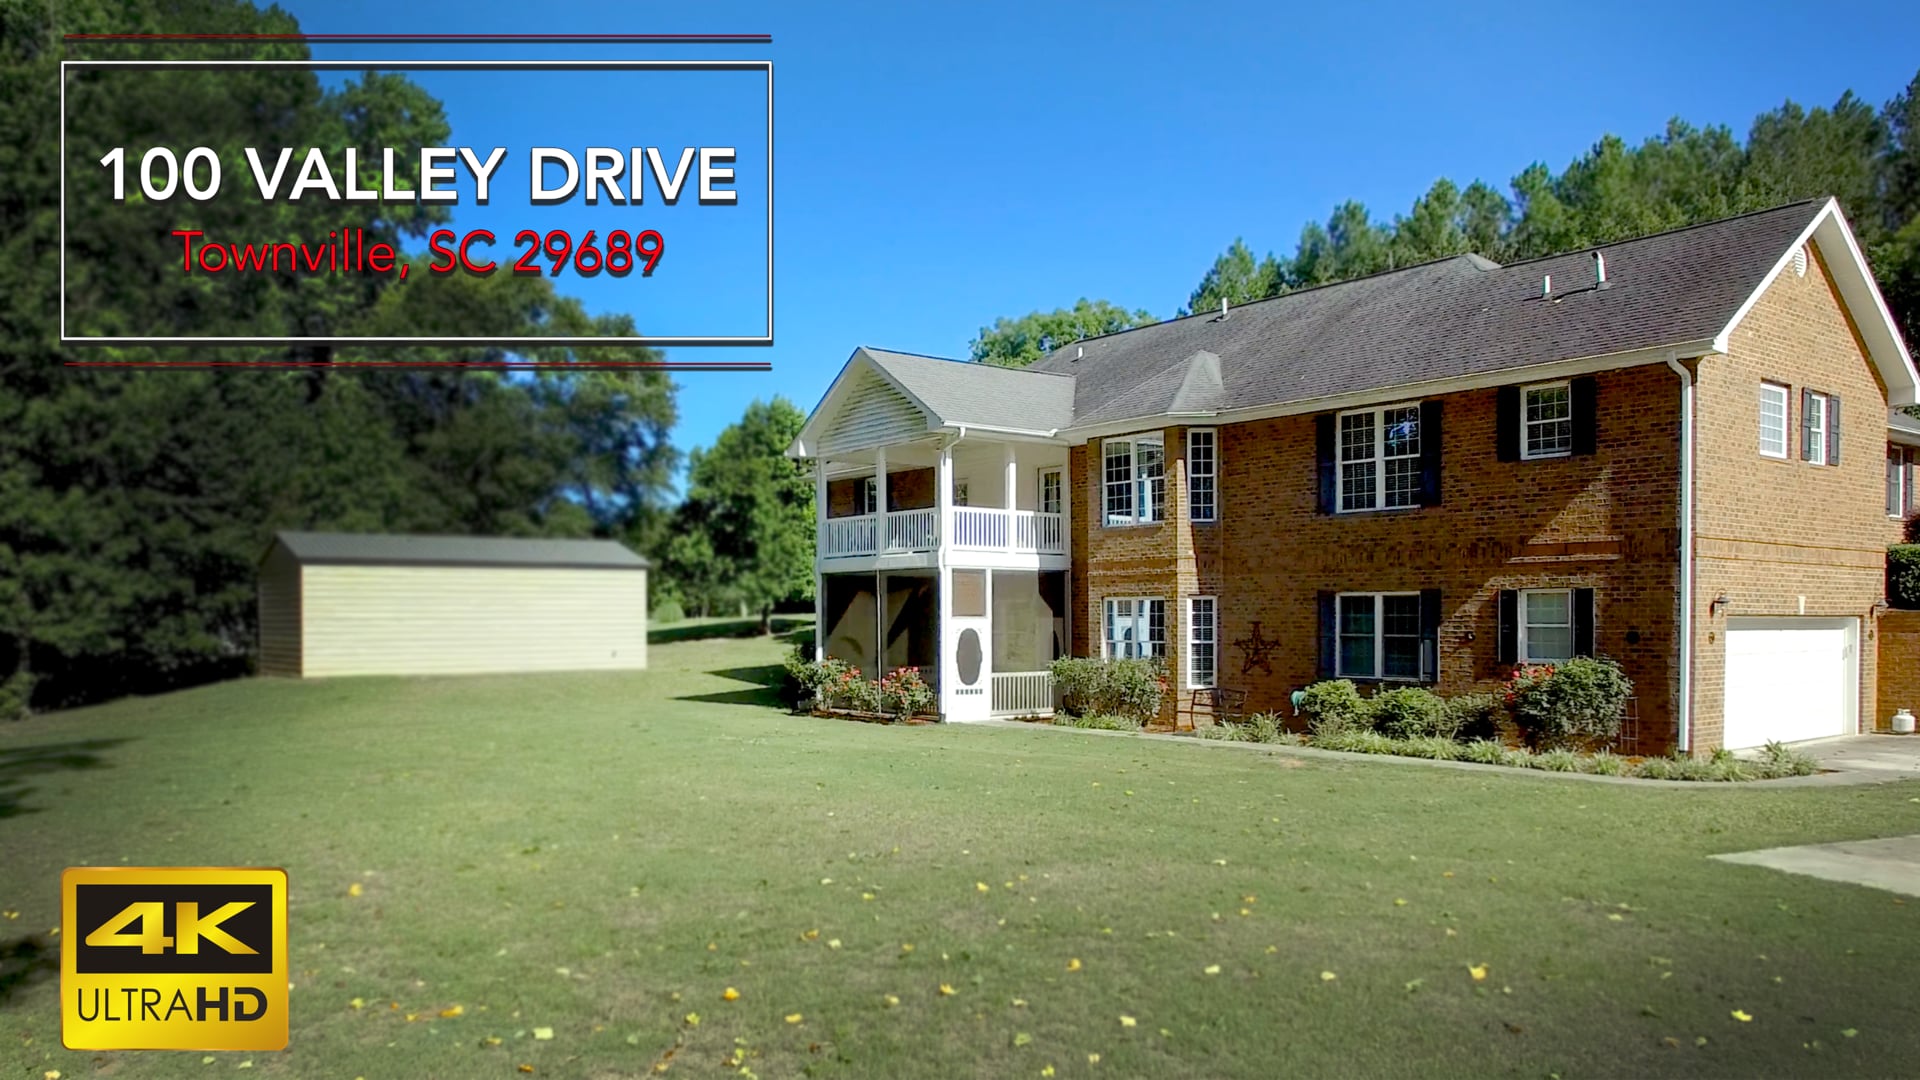 100 Valley Drive Townville SC - Home For Sale